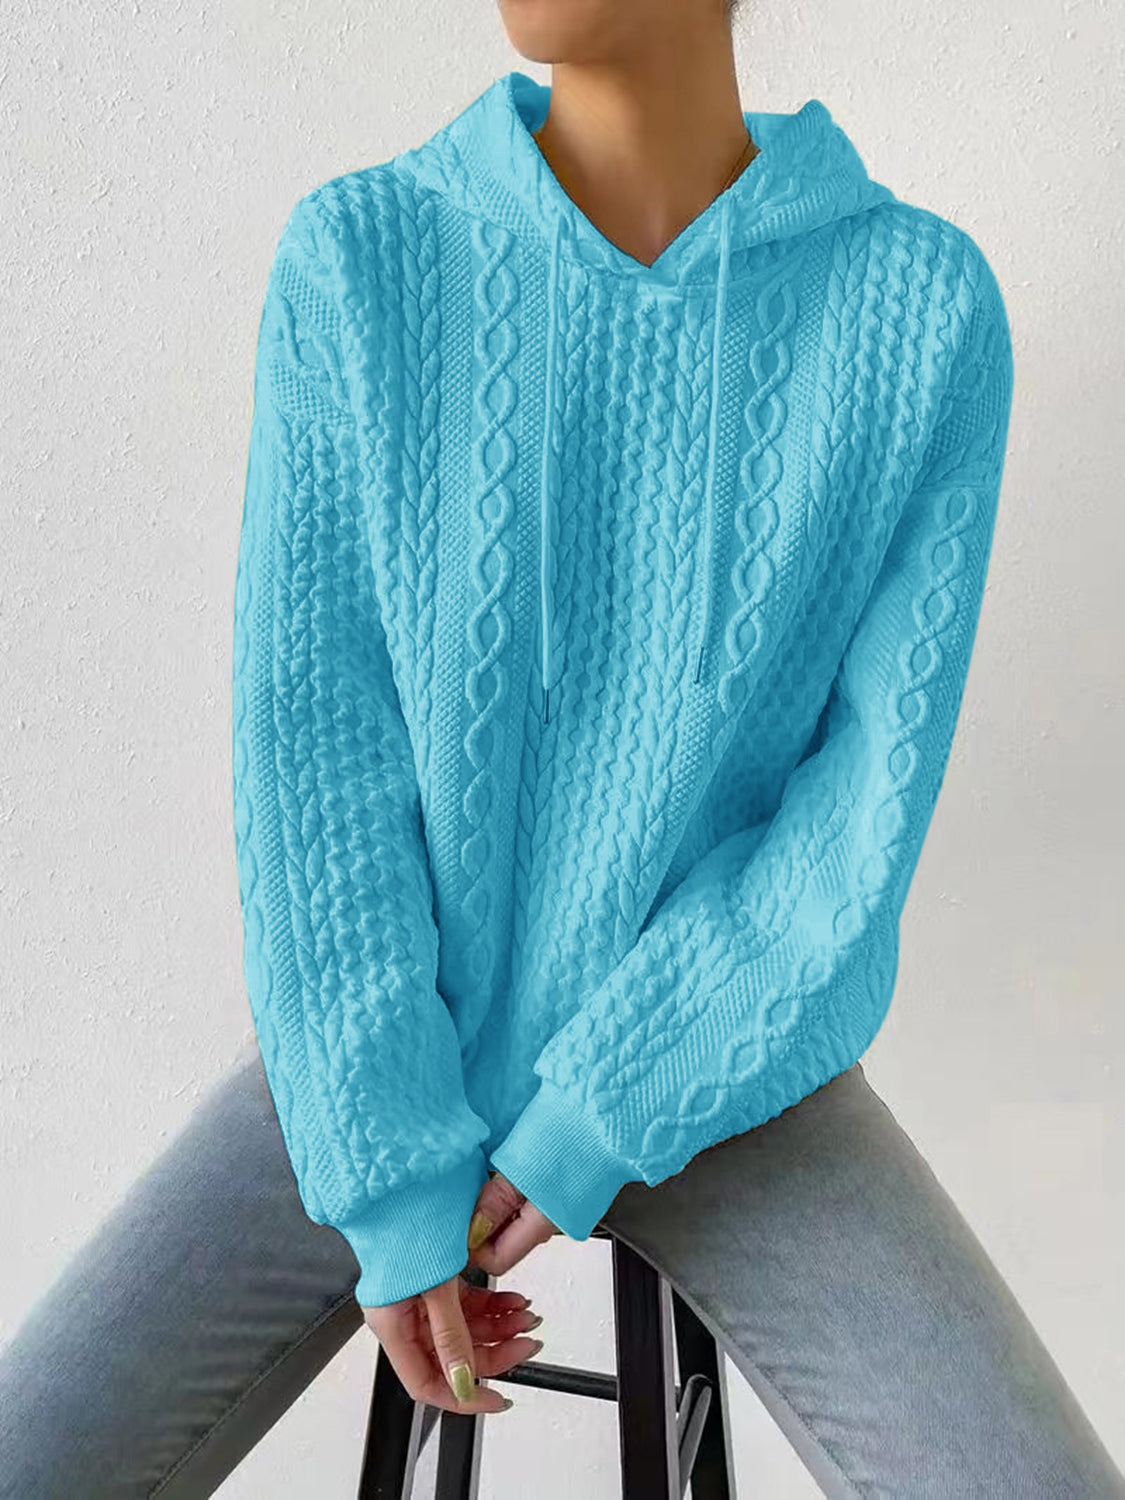 Textured Drawstring Long Sleeve Hoodie - Teal / M - Women’s Clothing & Accessories - Shirts & Tops - 29 - 2024